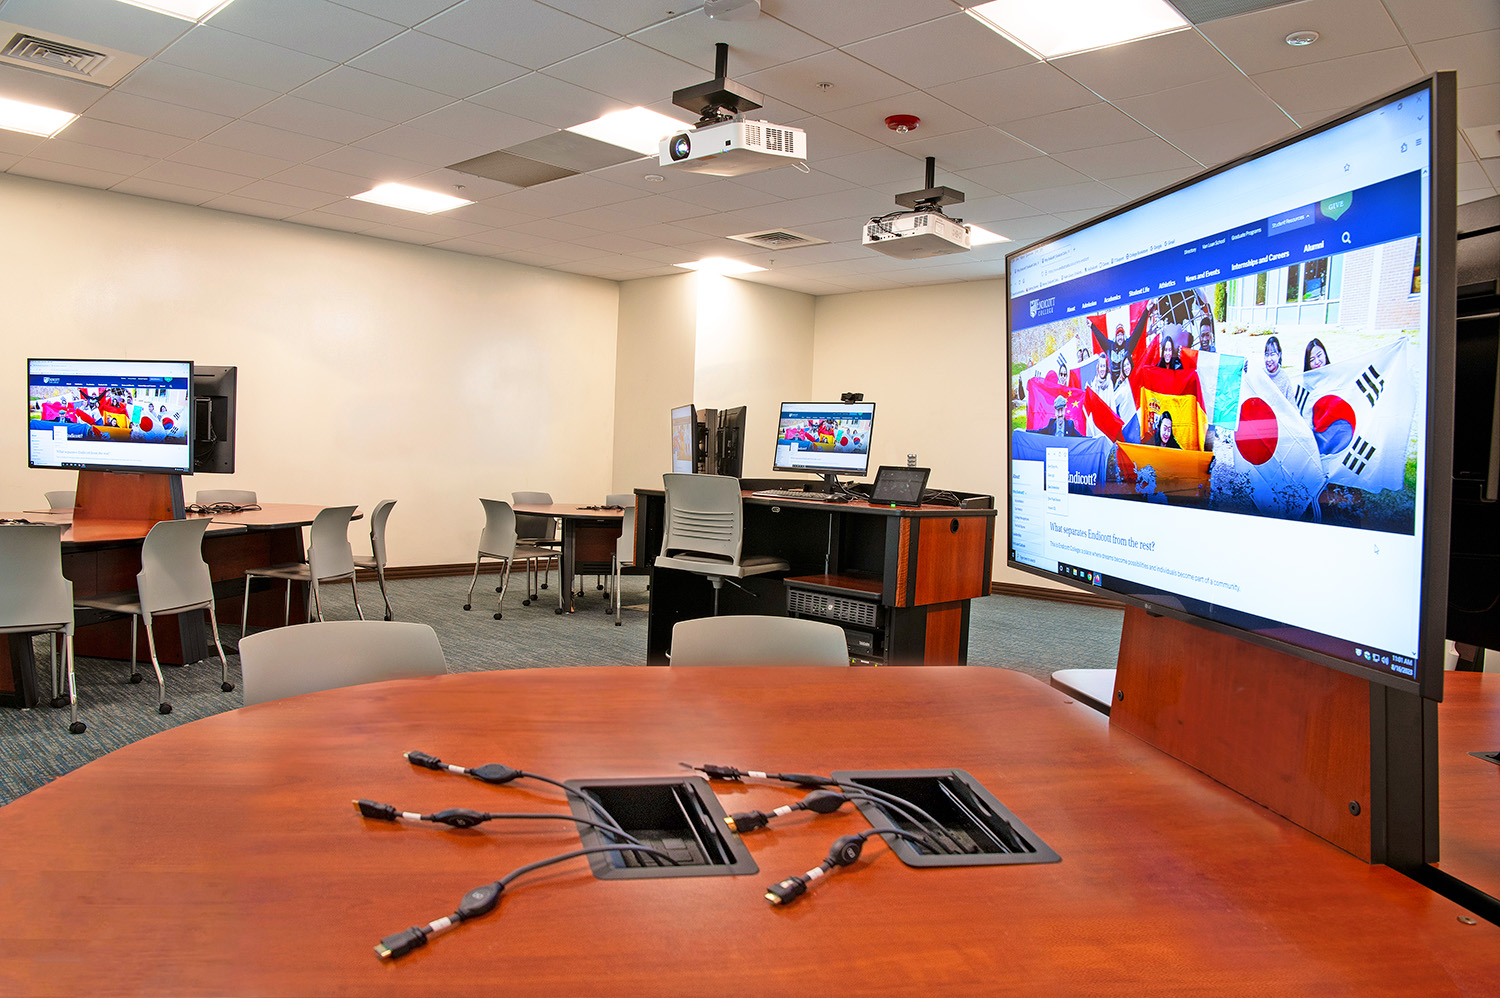 Each team station includes an Extron Cable Cubby® enclosure with multiple Show Me® and HDMI cables, network jacks, and power outlets for easy AV connectivity of multiple personal devices.